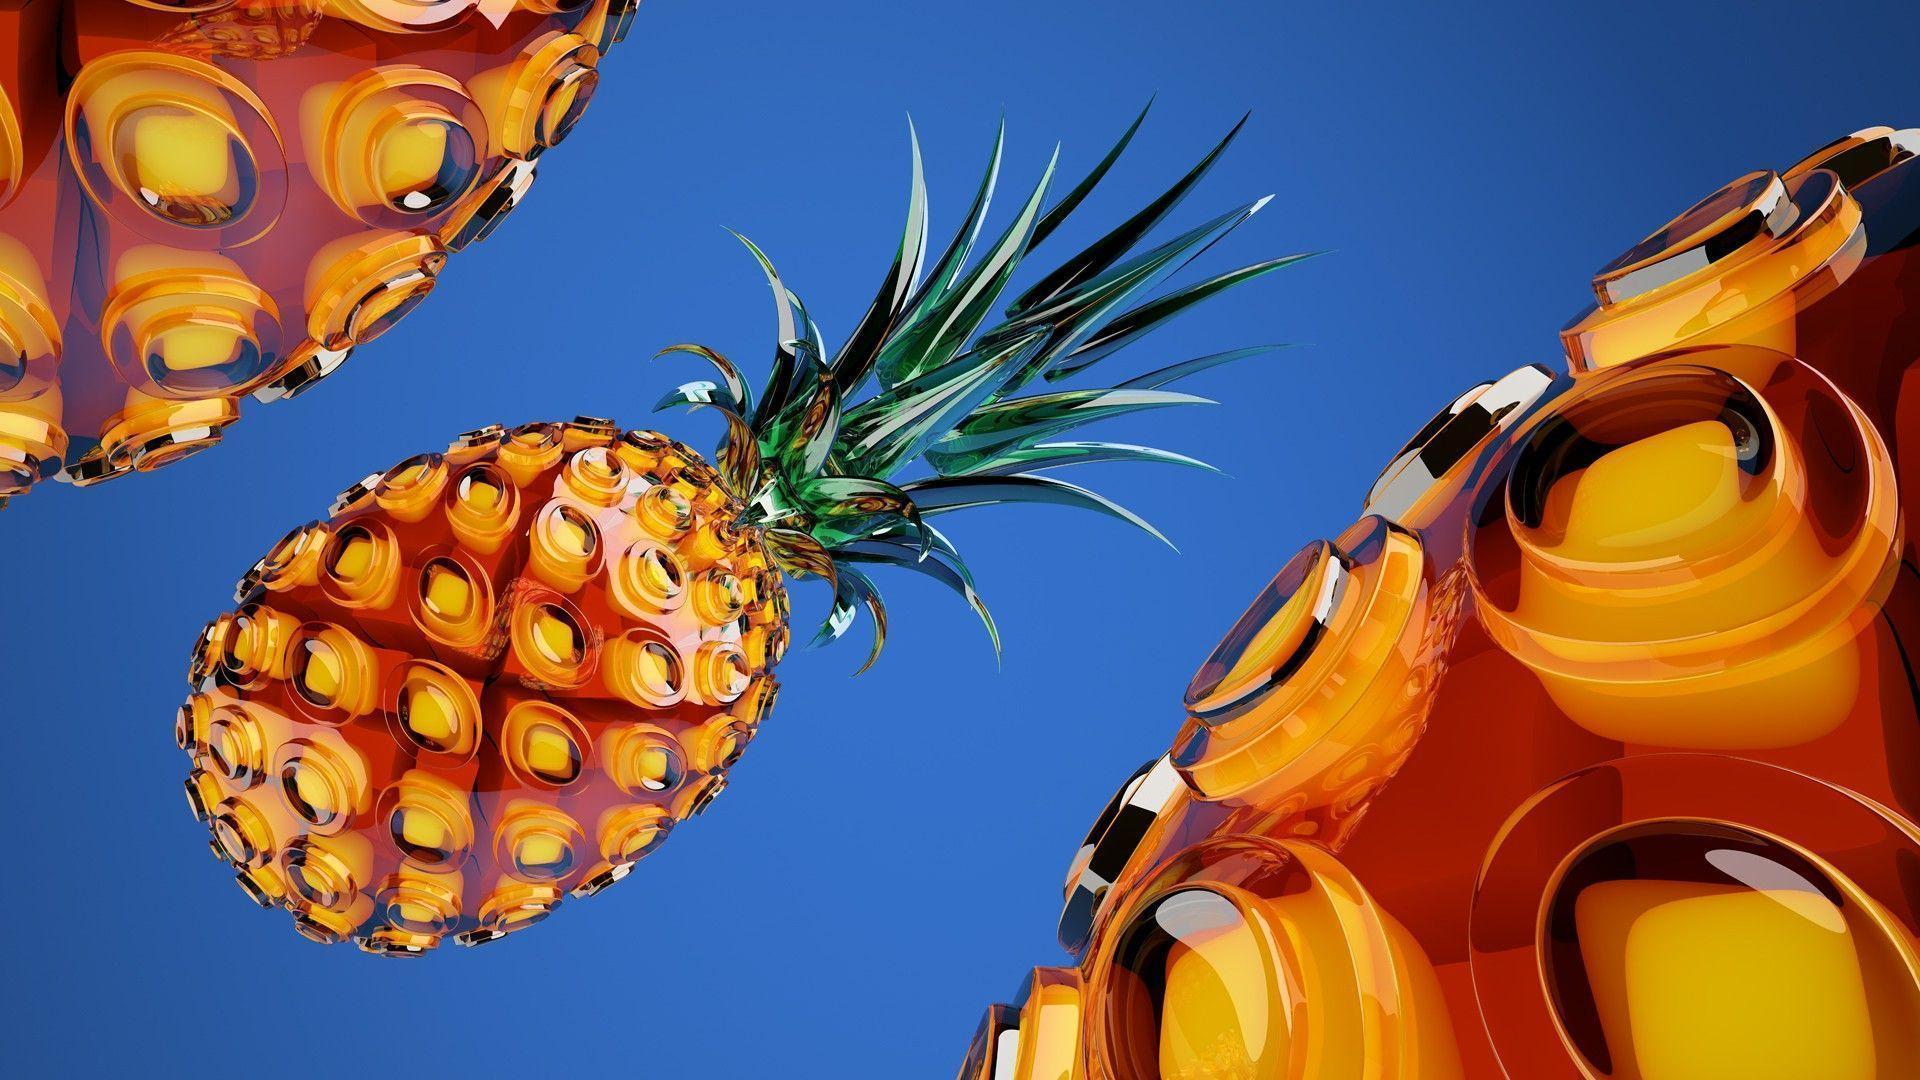 Pineapples Wallpaper High Quality